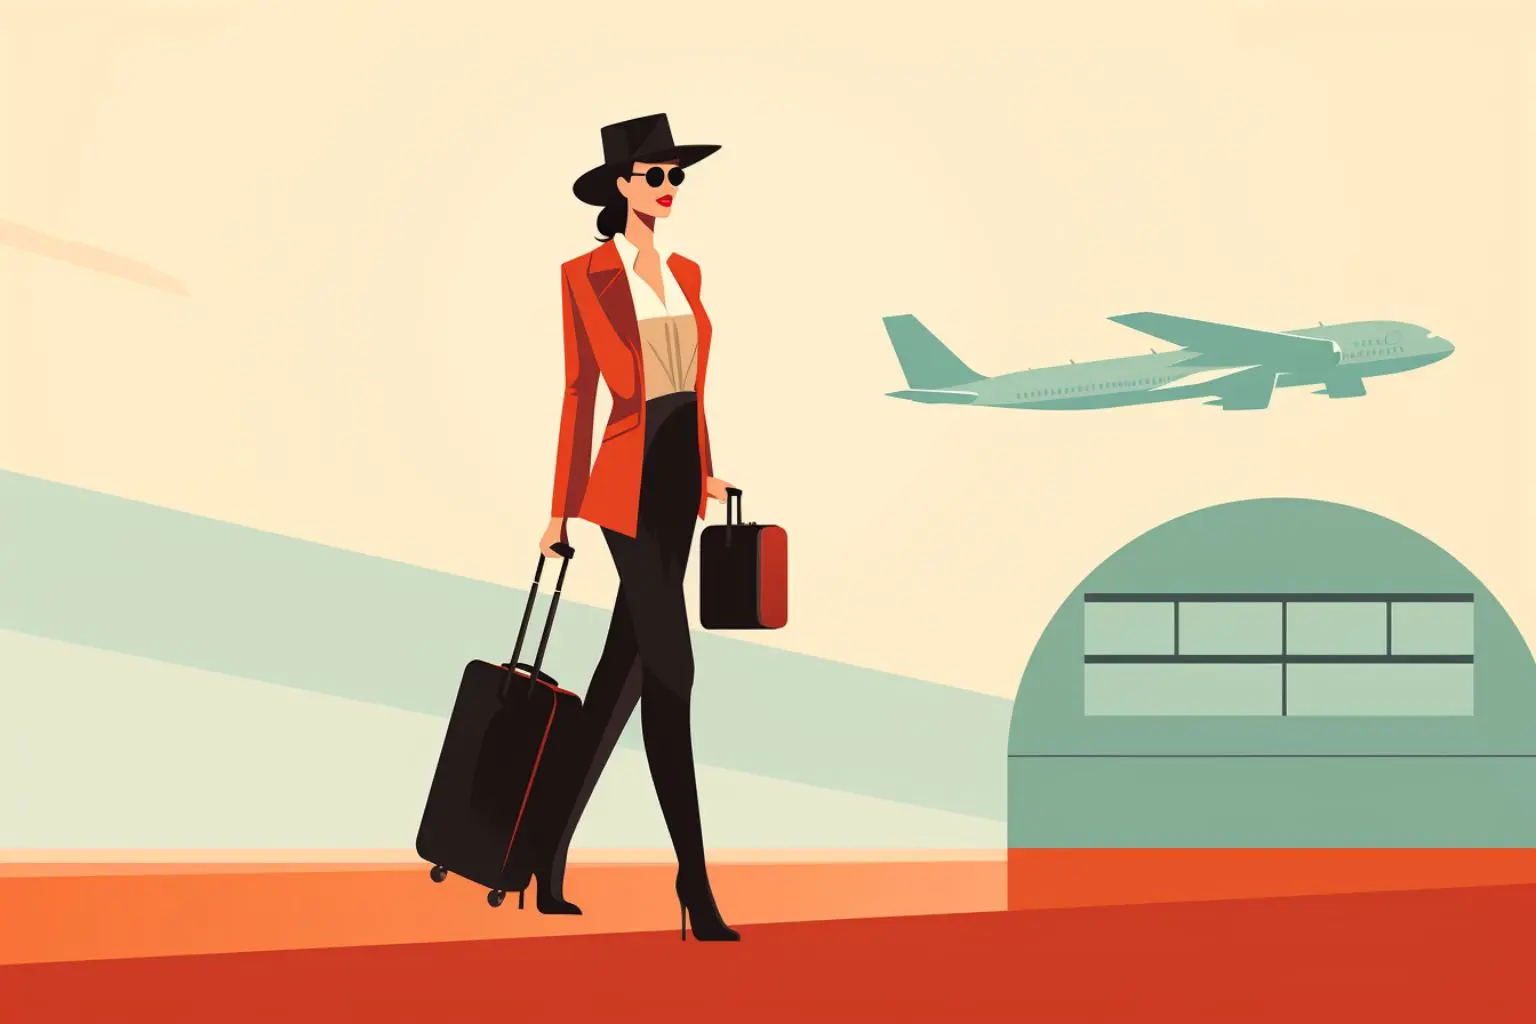 What should you do when an airline overcharges you for luggage?